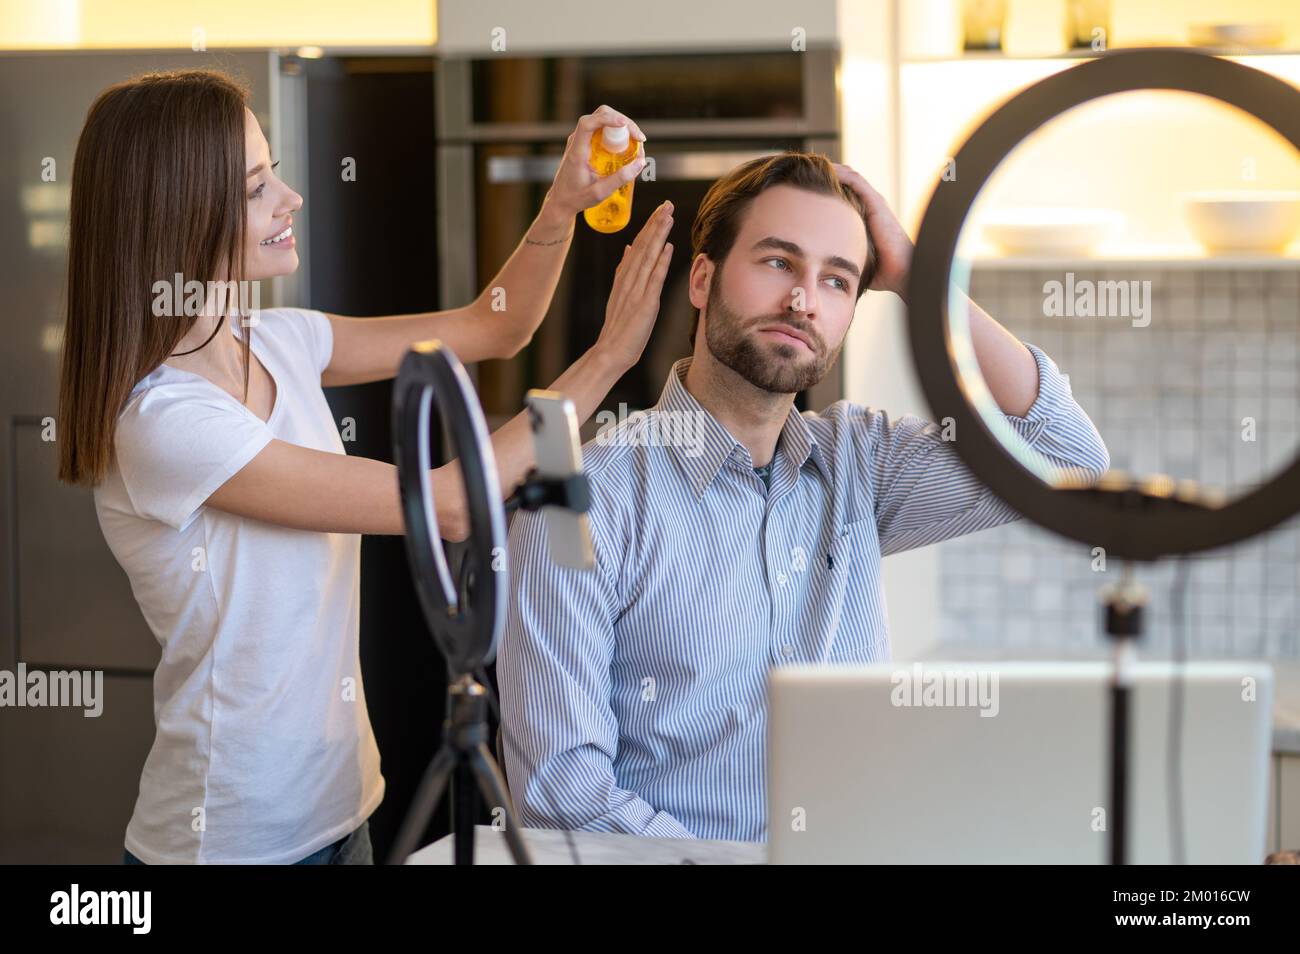 Appearance. Long-haired woman making hair to a man before webinar. Stock Photo